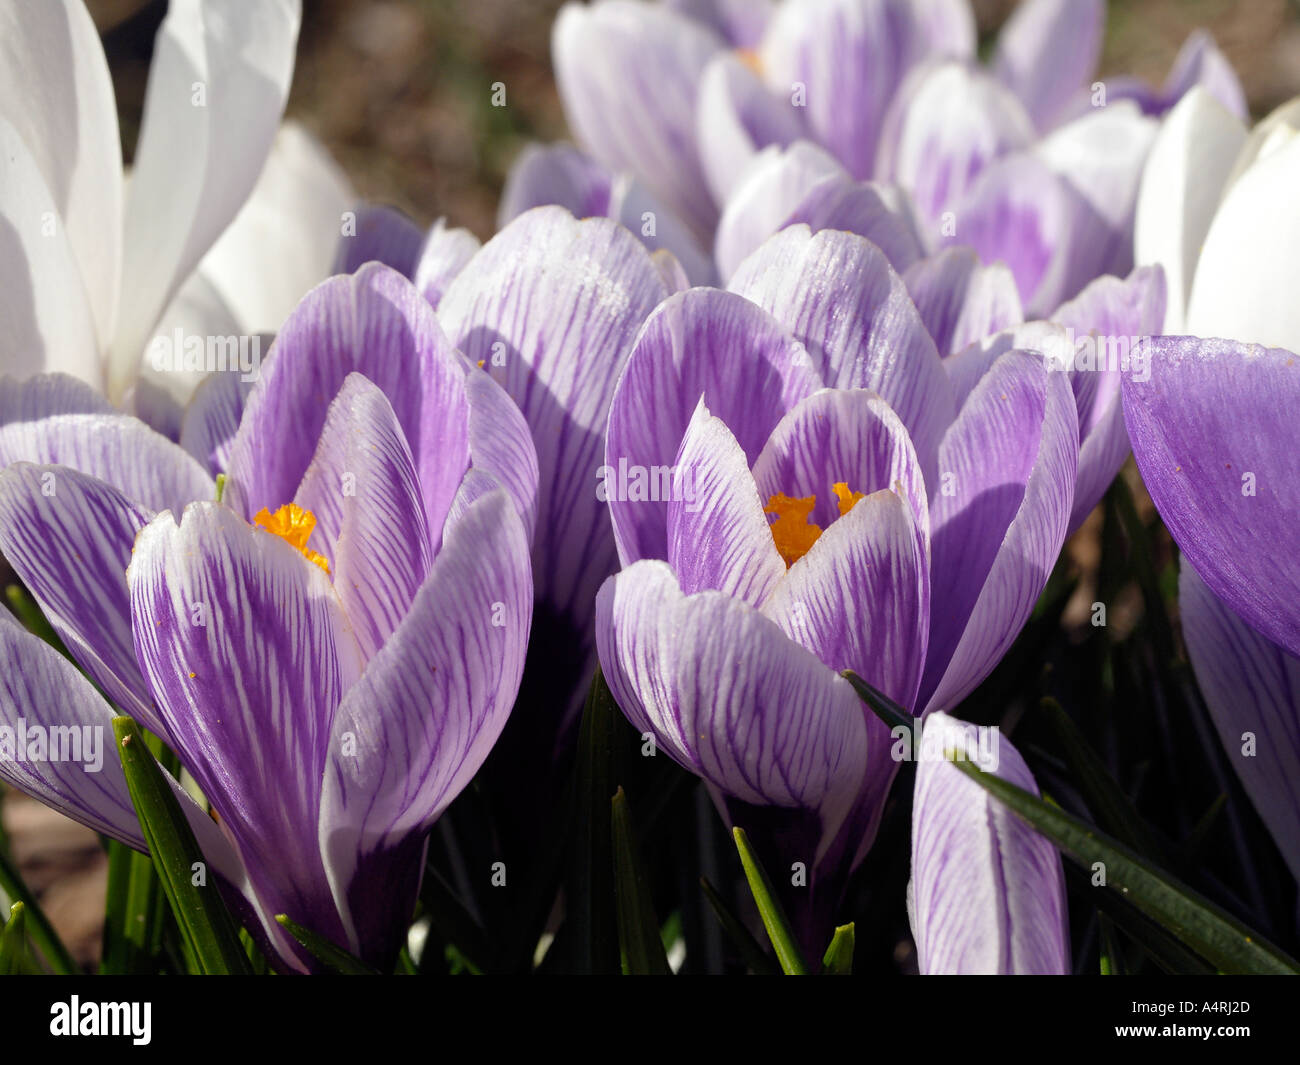 Crocus flowers crocus biflorus are the first to bloom in the spring Here is a patch of purple white and verigated Stock Photo